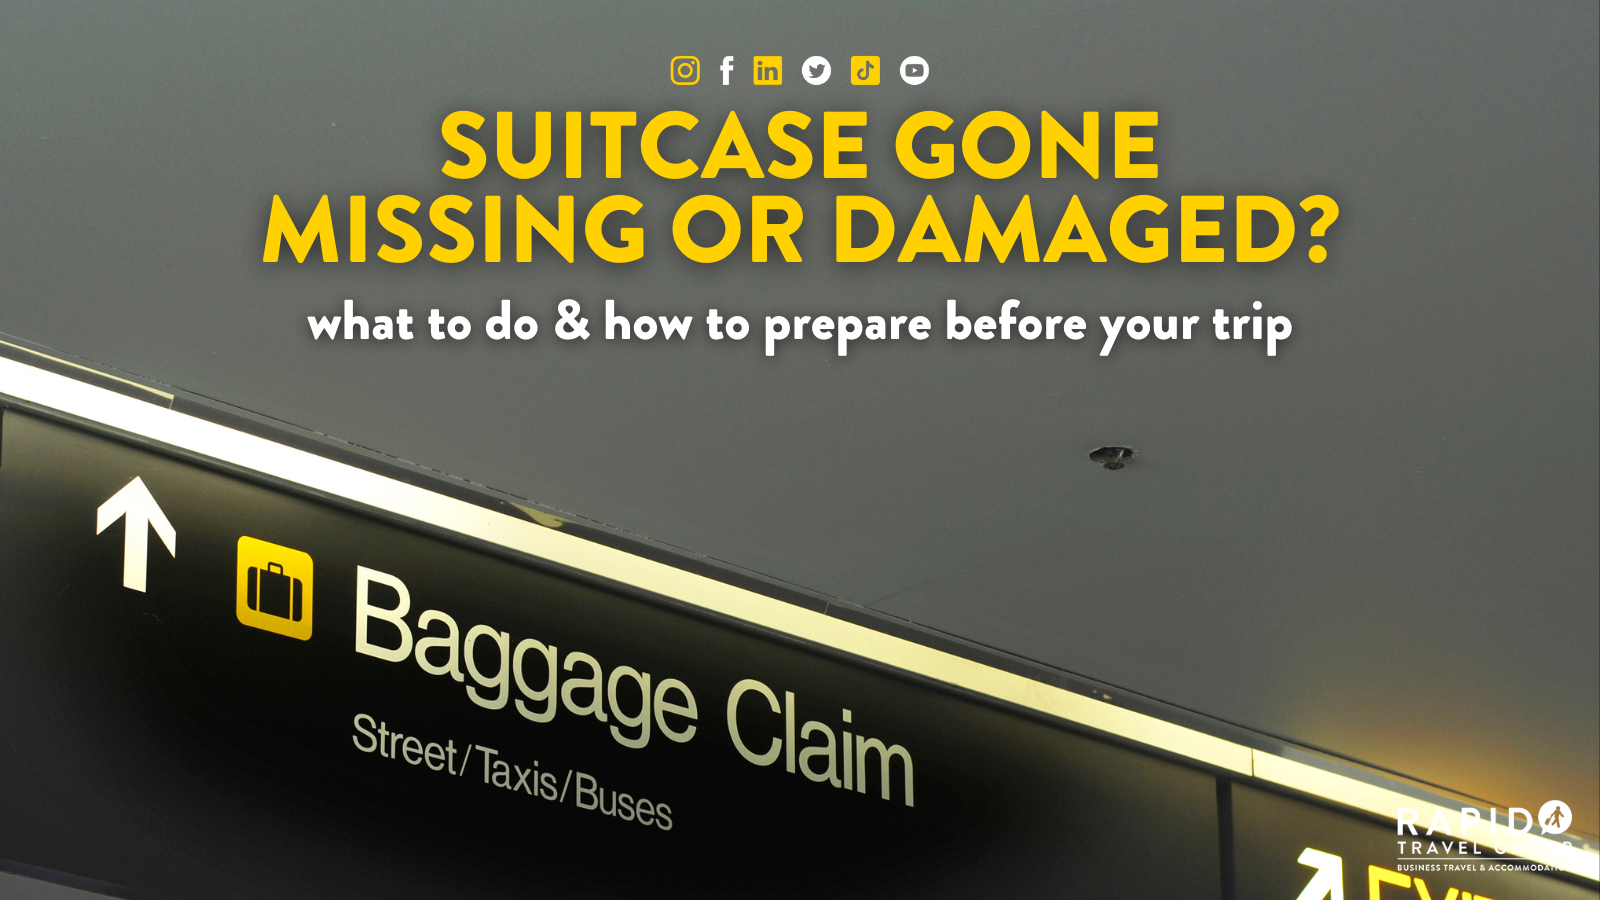 Suitcase gone missing or damaged? What to do and how to prepare before your trip: